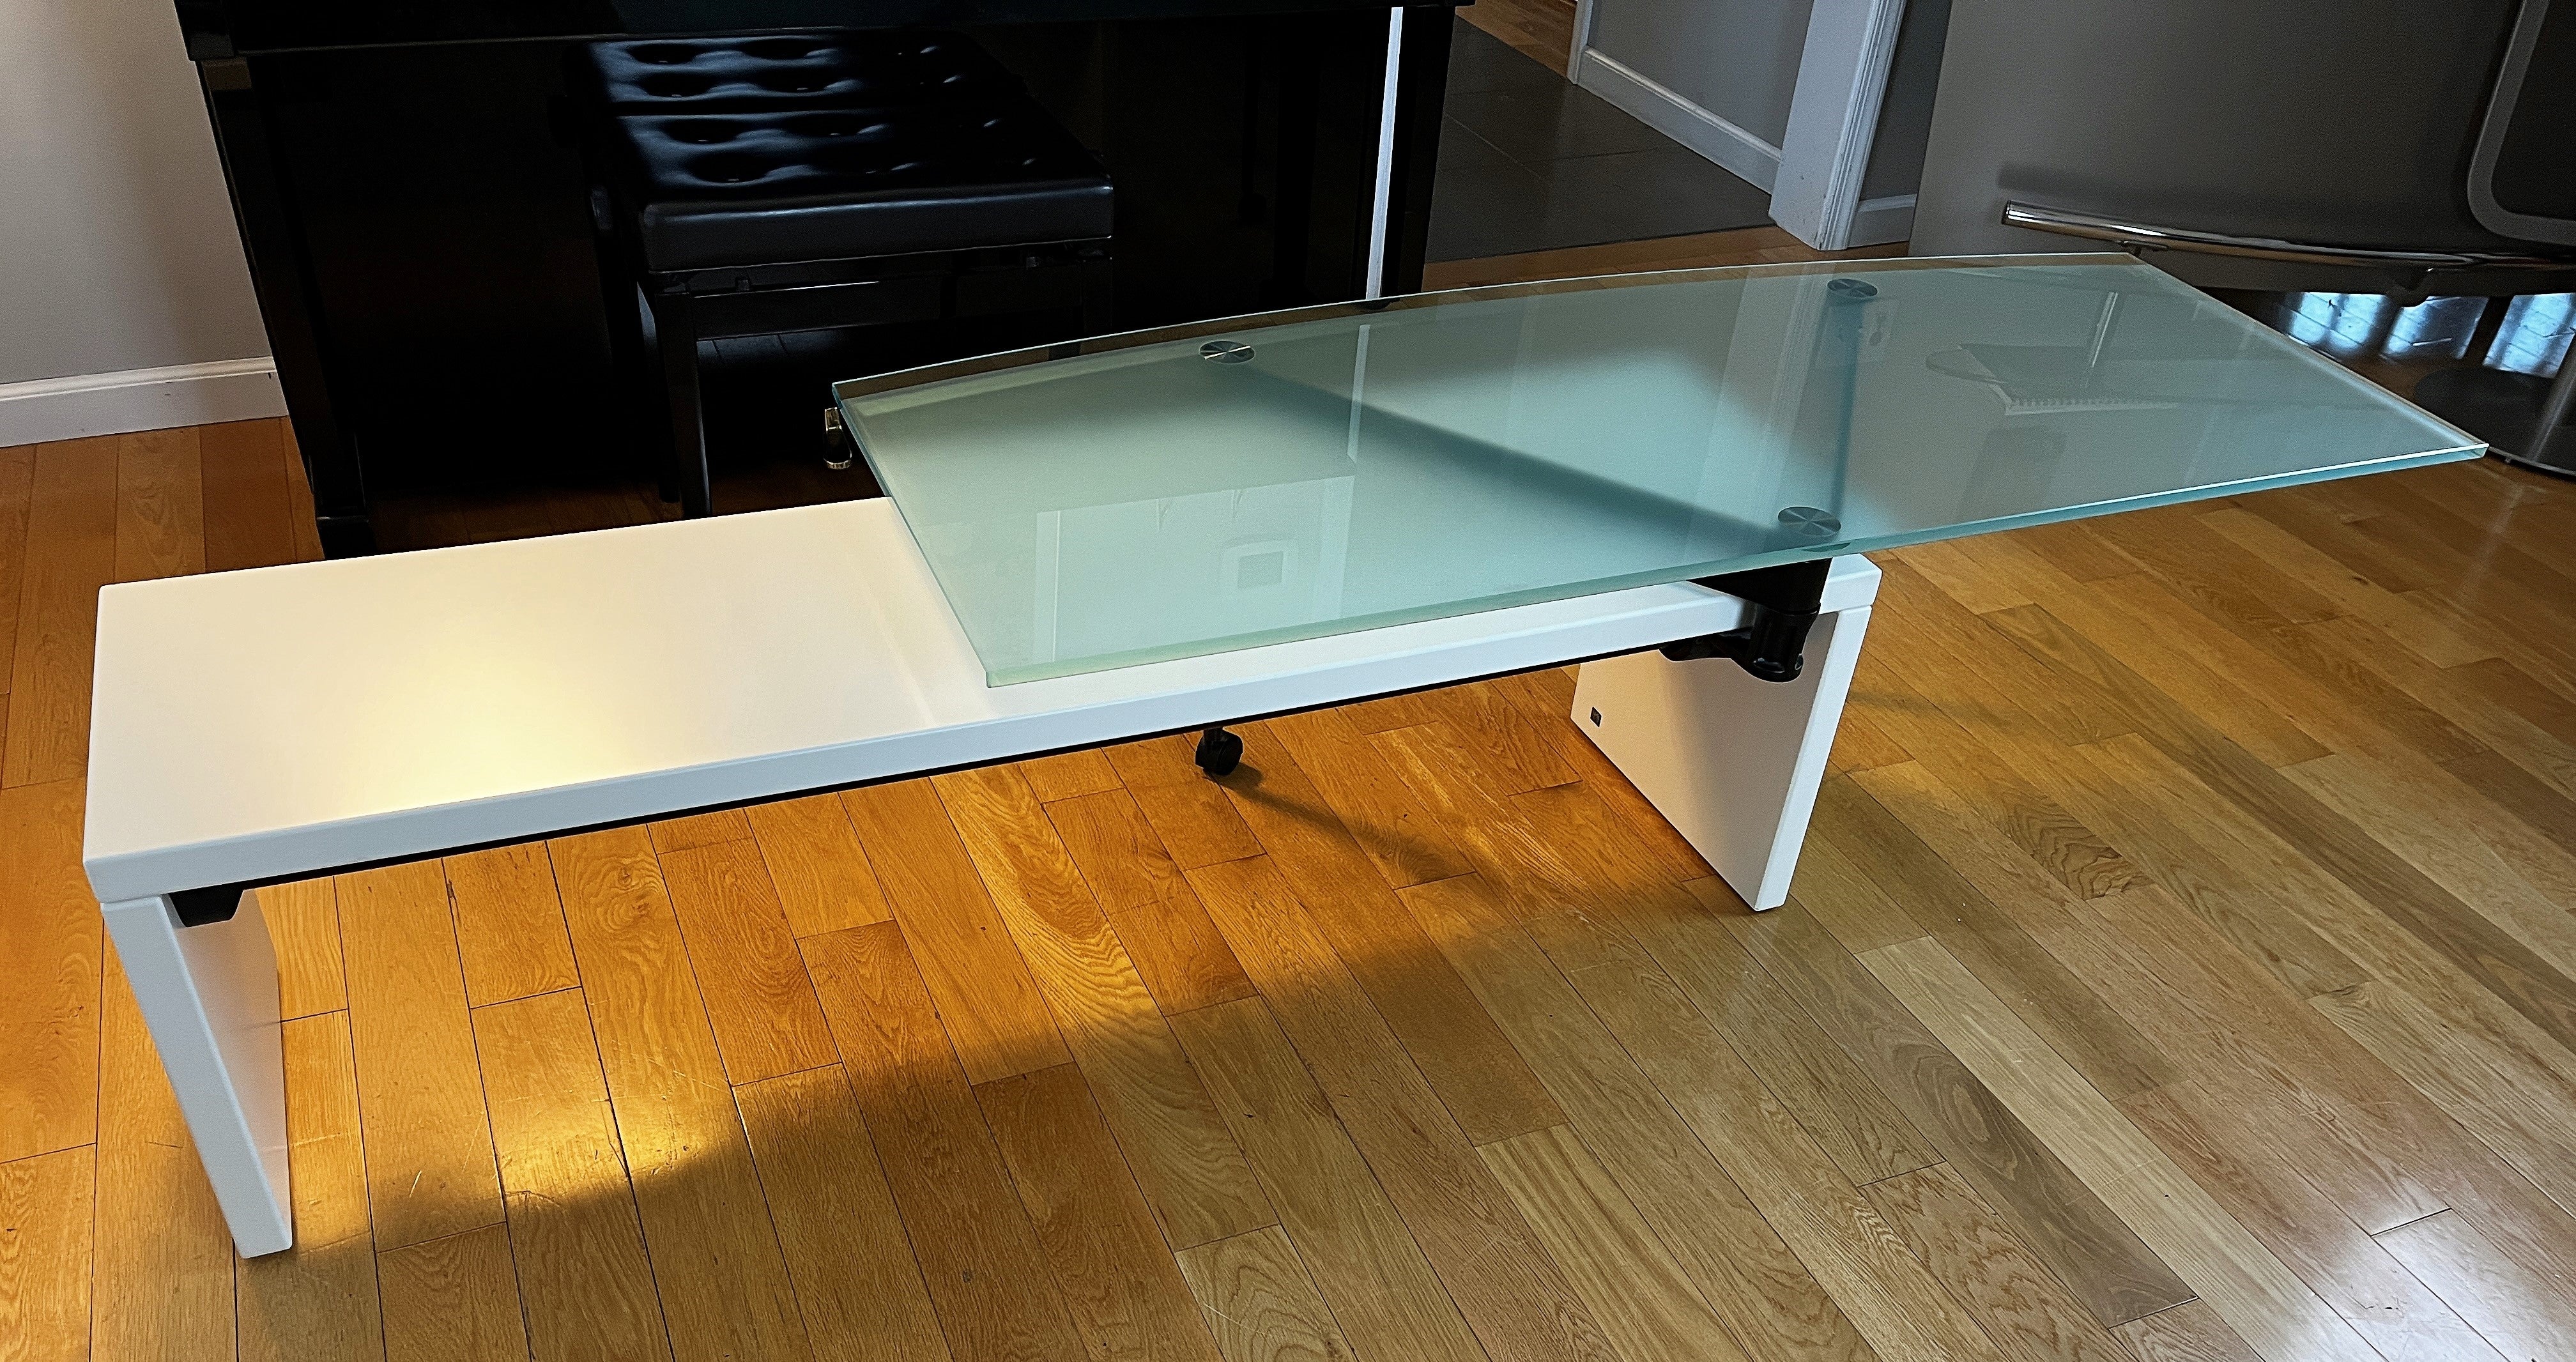 B&B Italia coffee table - 360 degree rotating blue glass top over white lacquer base. A one of a kind coffee table. Glass is half inch thick.